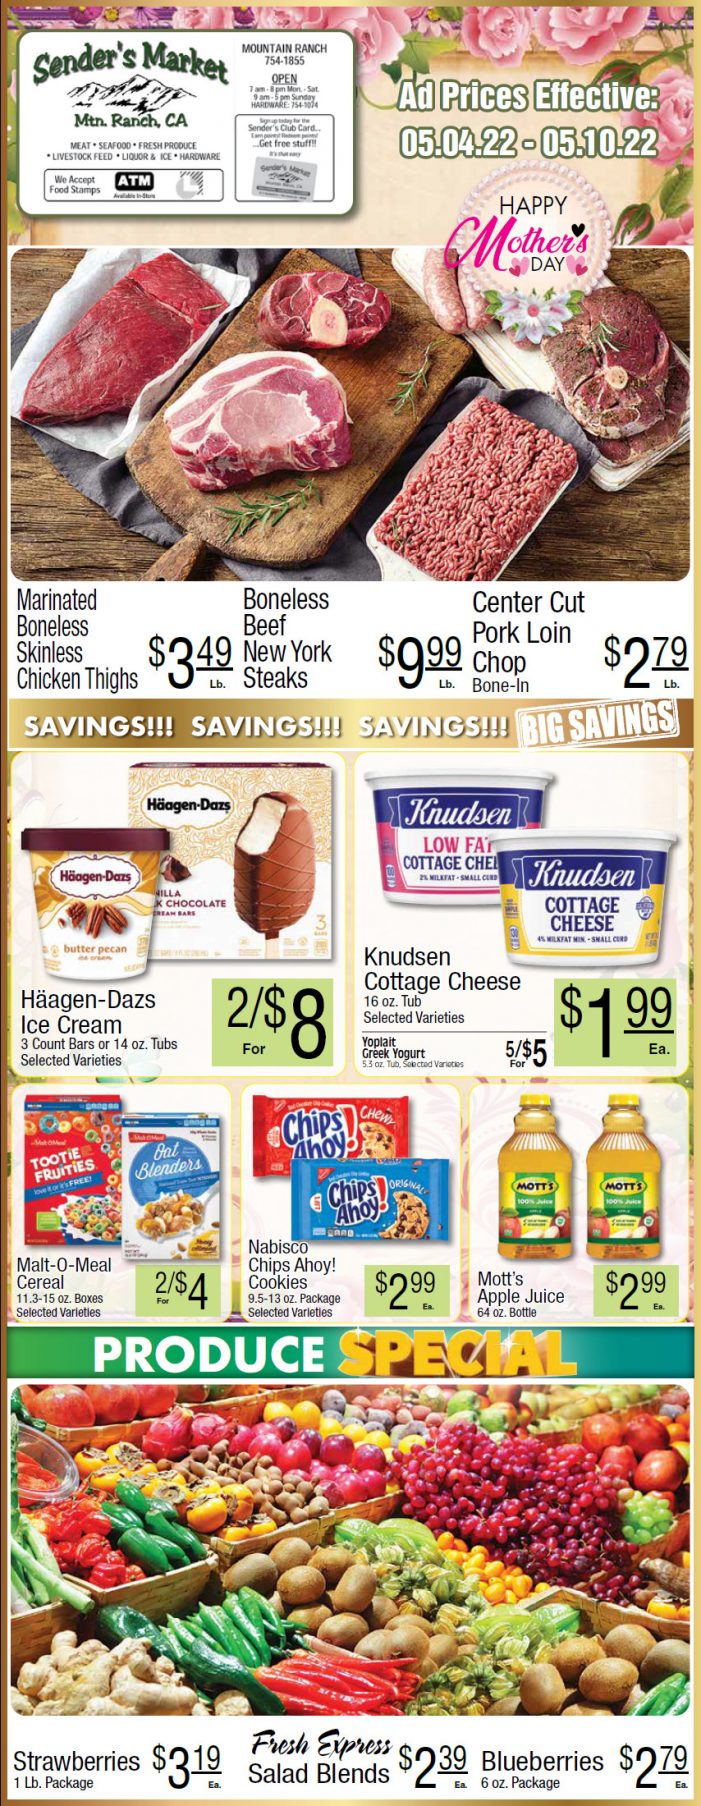 Sender’s Market Weekly Ad & Grocery Specials Through May 10th! Shop Local & Save!